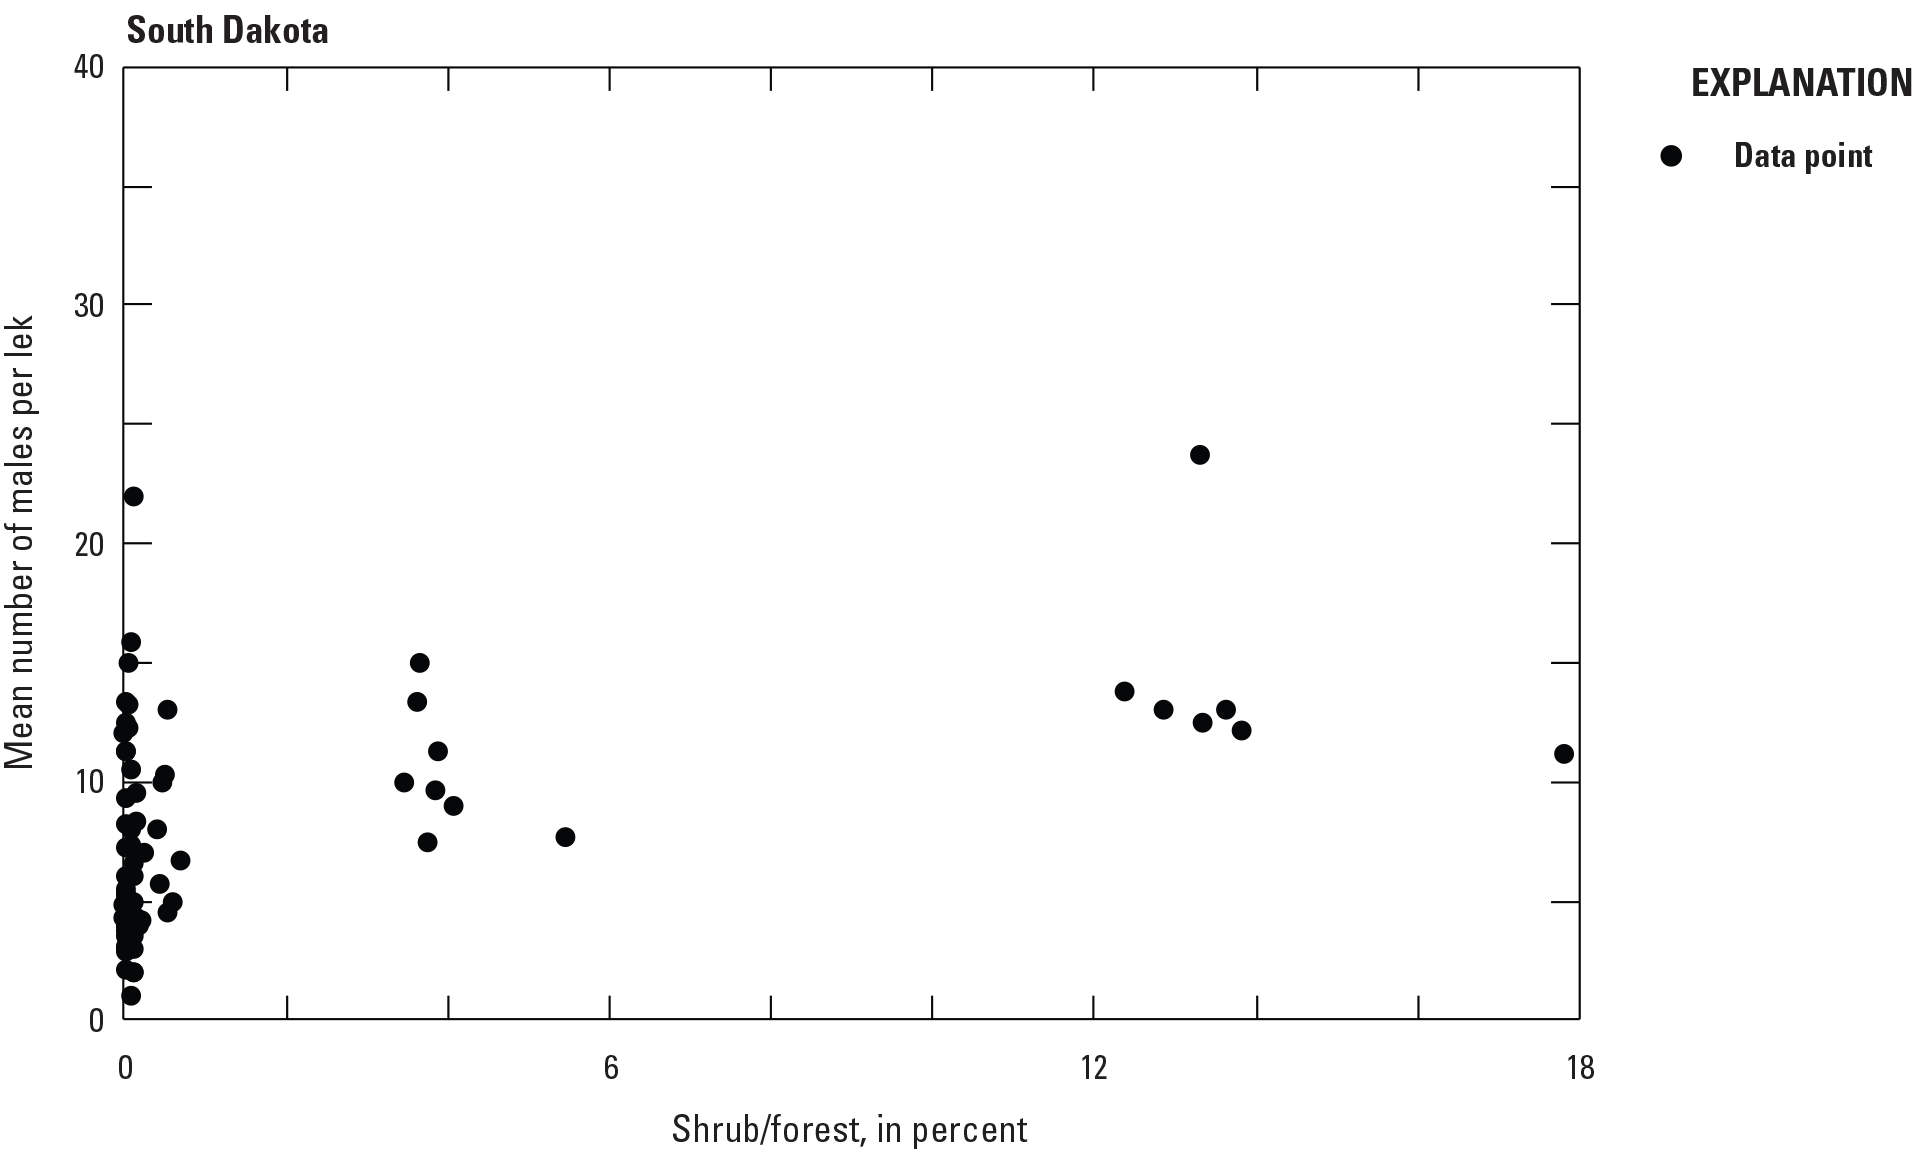 Mean number male grouse per lek varies by percentage of shrub/forest